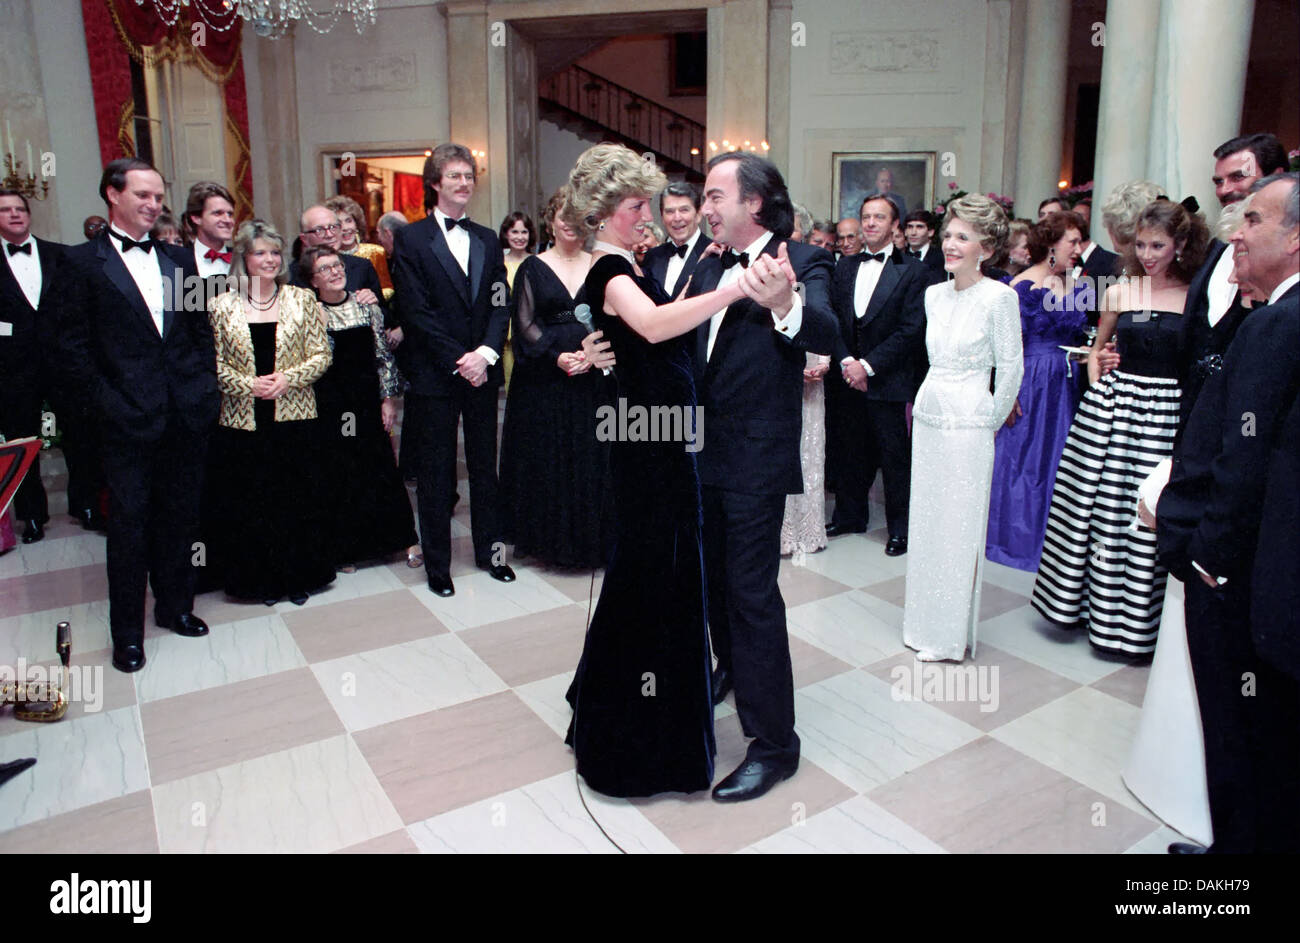 Diana, Princess of Wales dances with singer Neil Diamond during a White House Gala Dinner November 9, 1985 in Washington, DC. Stock Photo